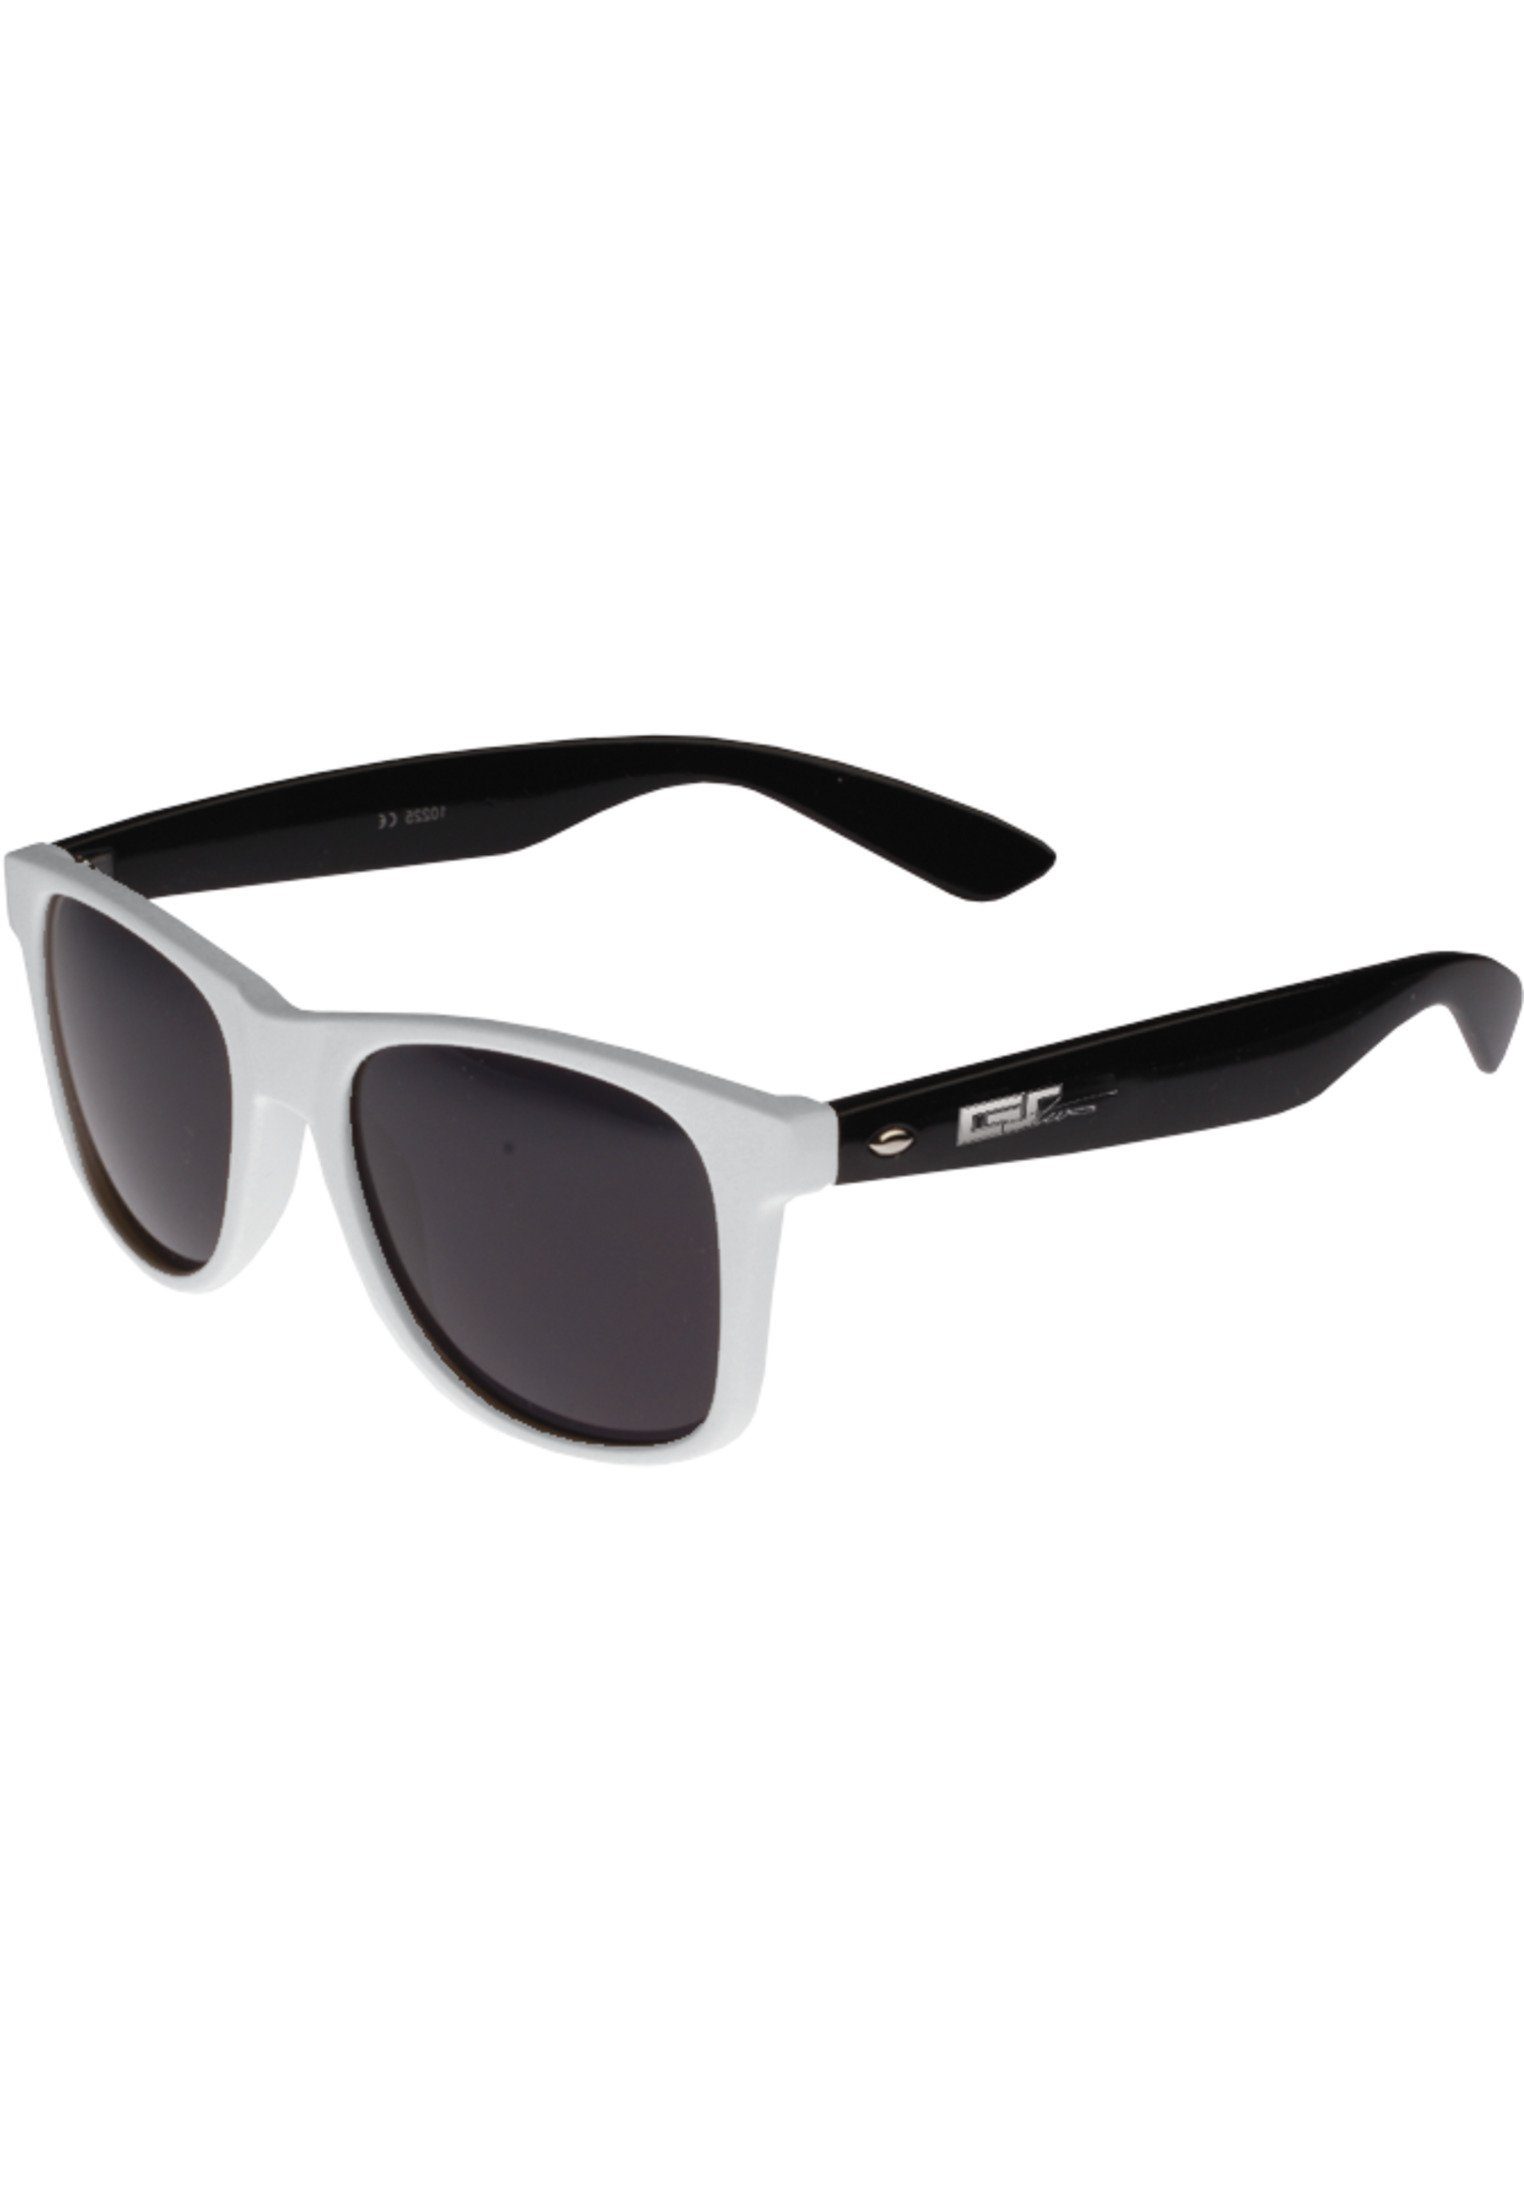 GStwo white/black Shades Groove MSTRDS Accessoires Sonnenbrille